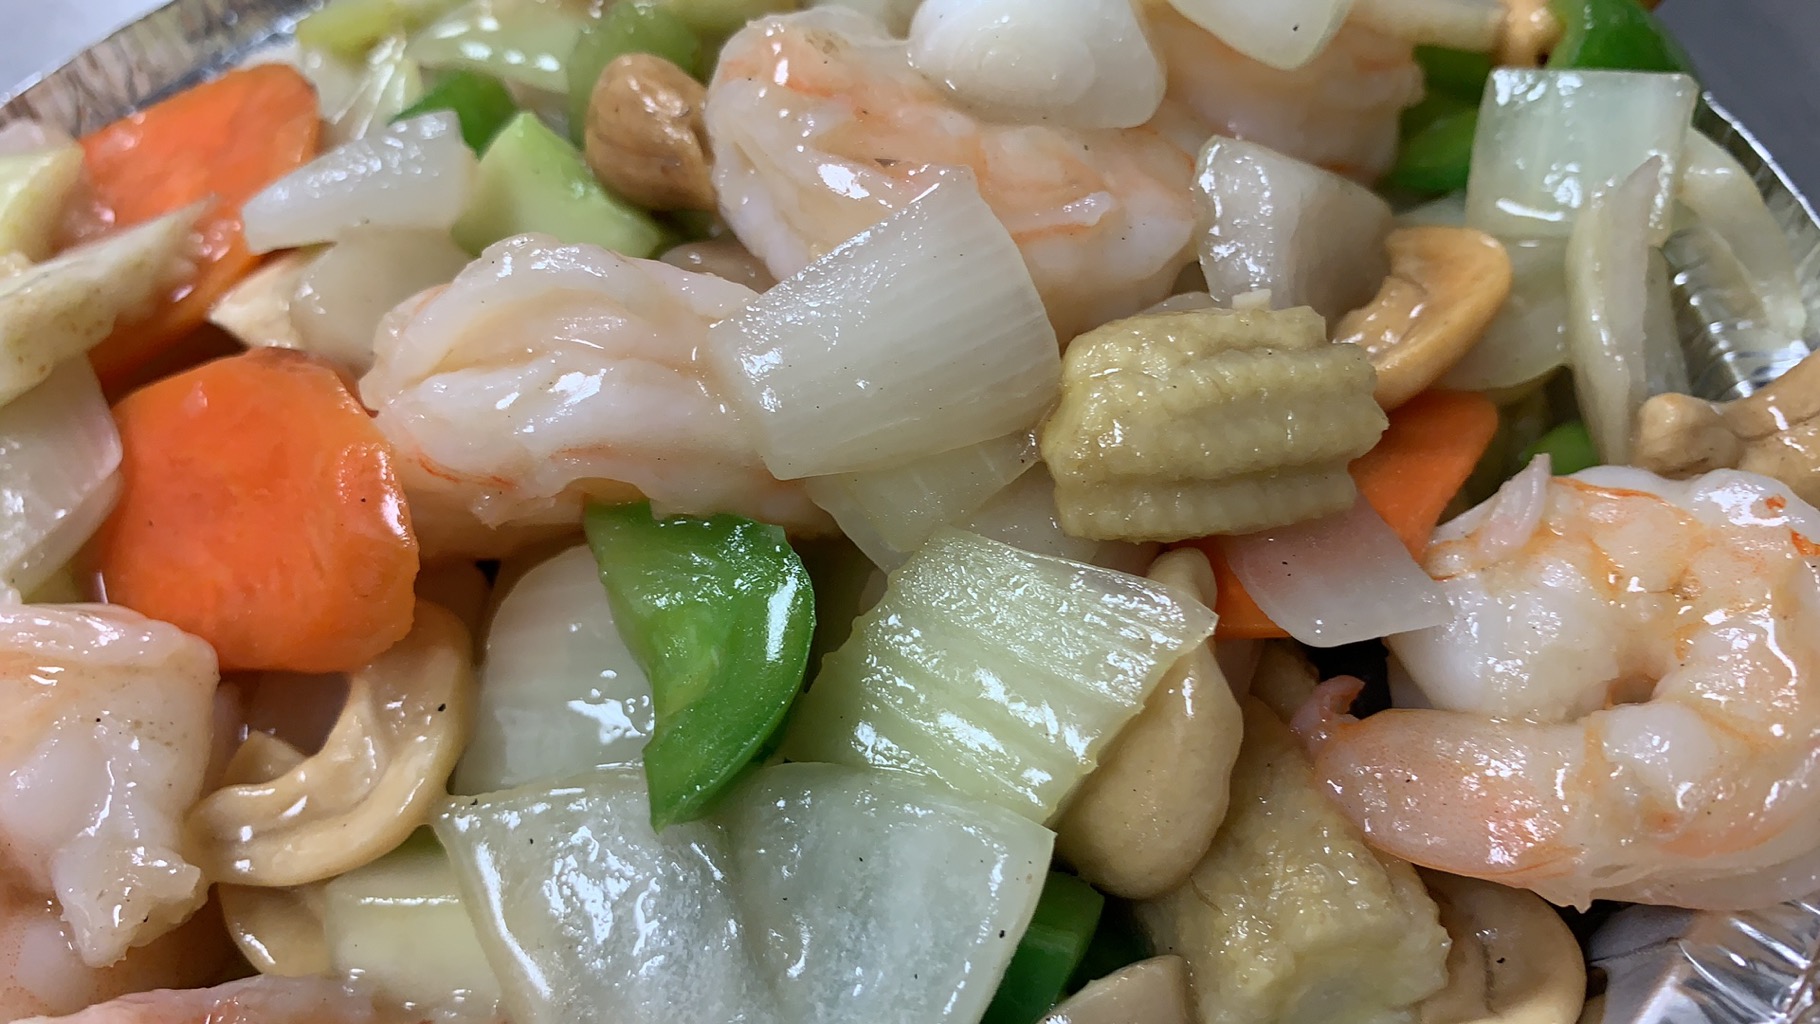 163. Shrimp with Cashew Nuts